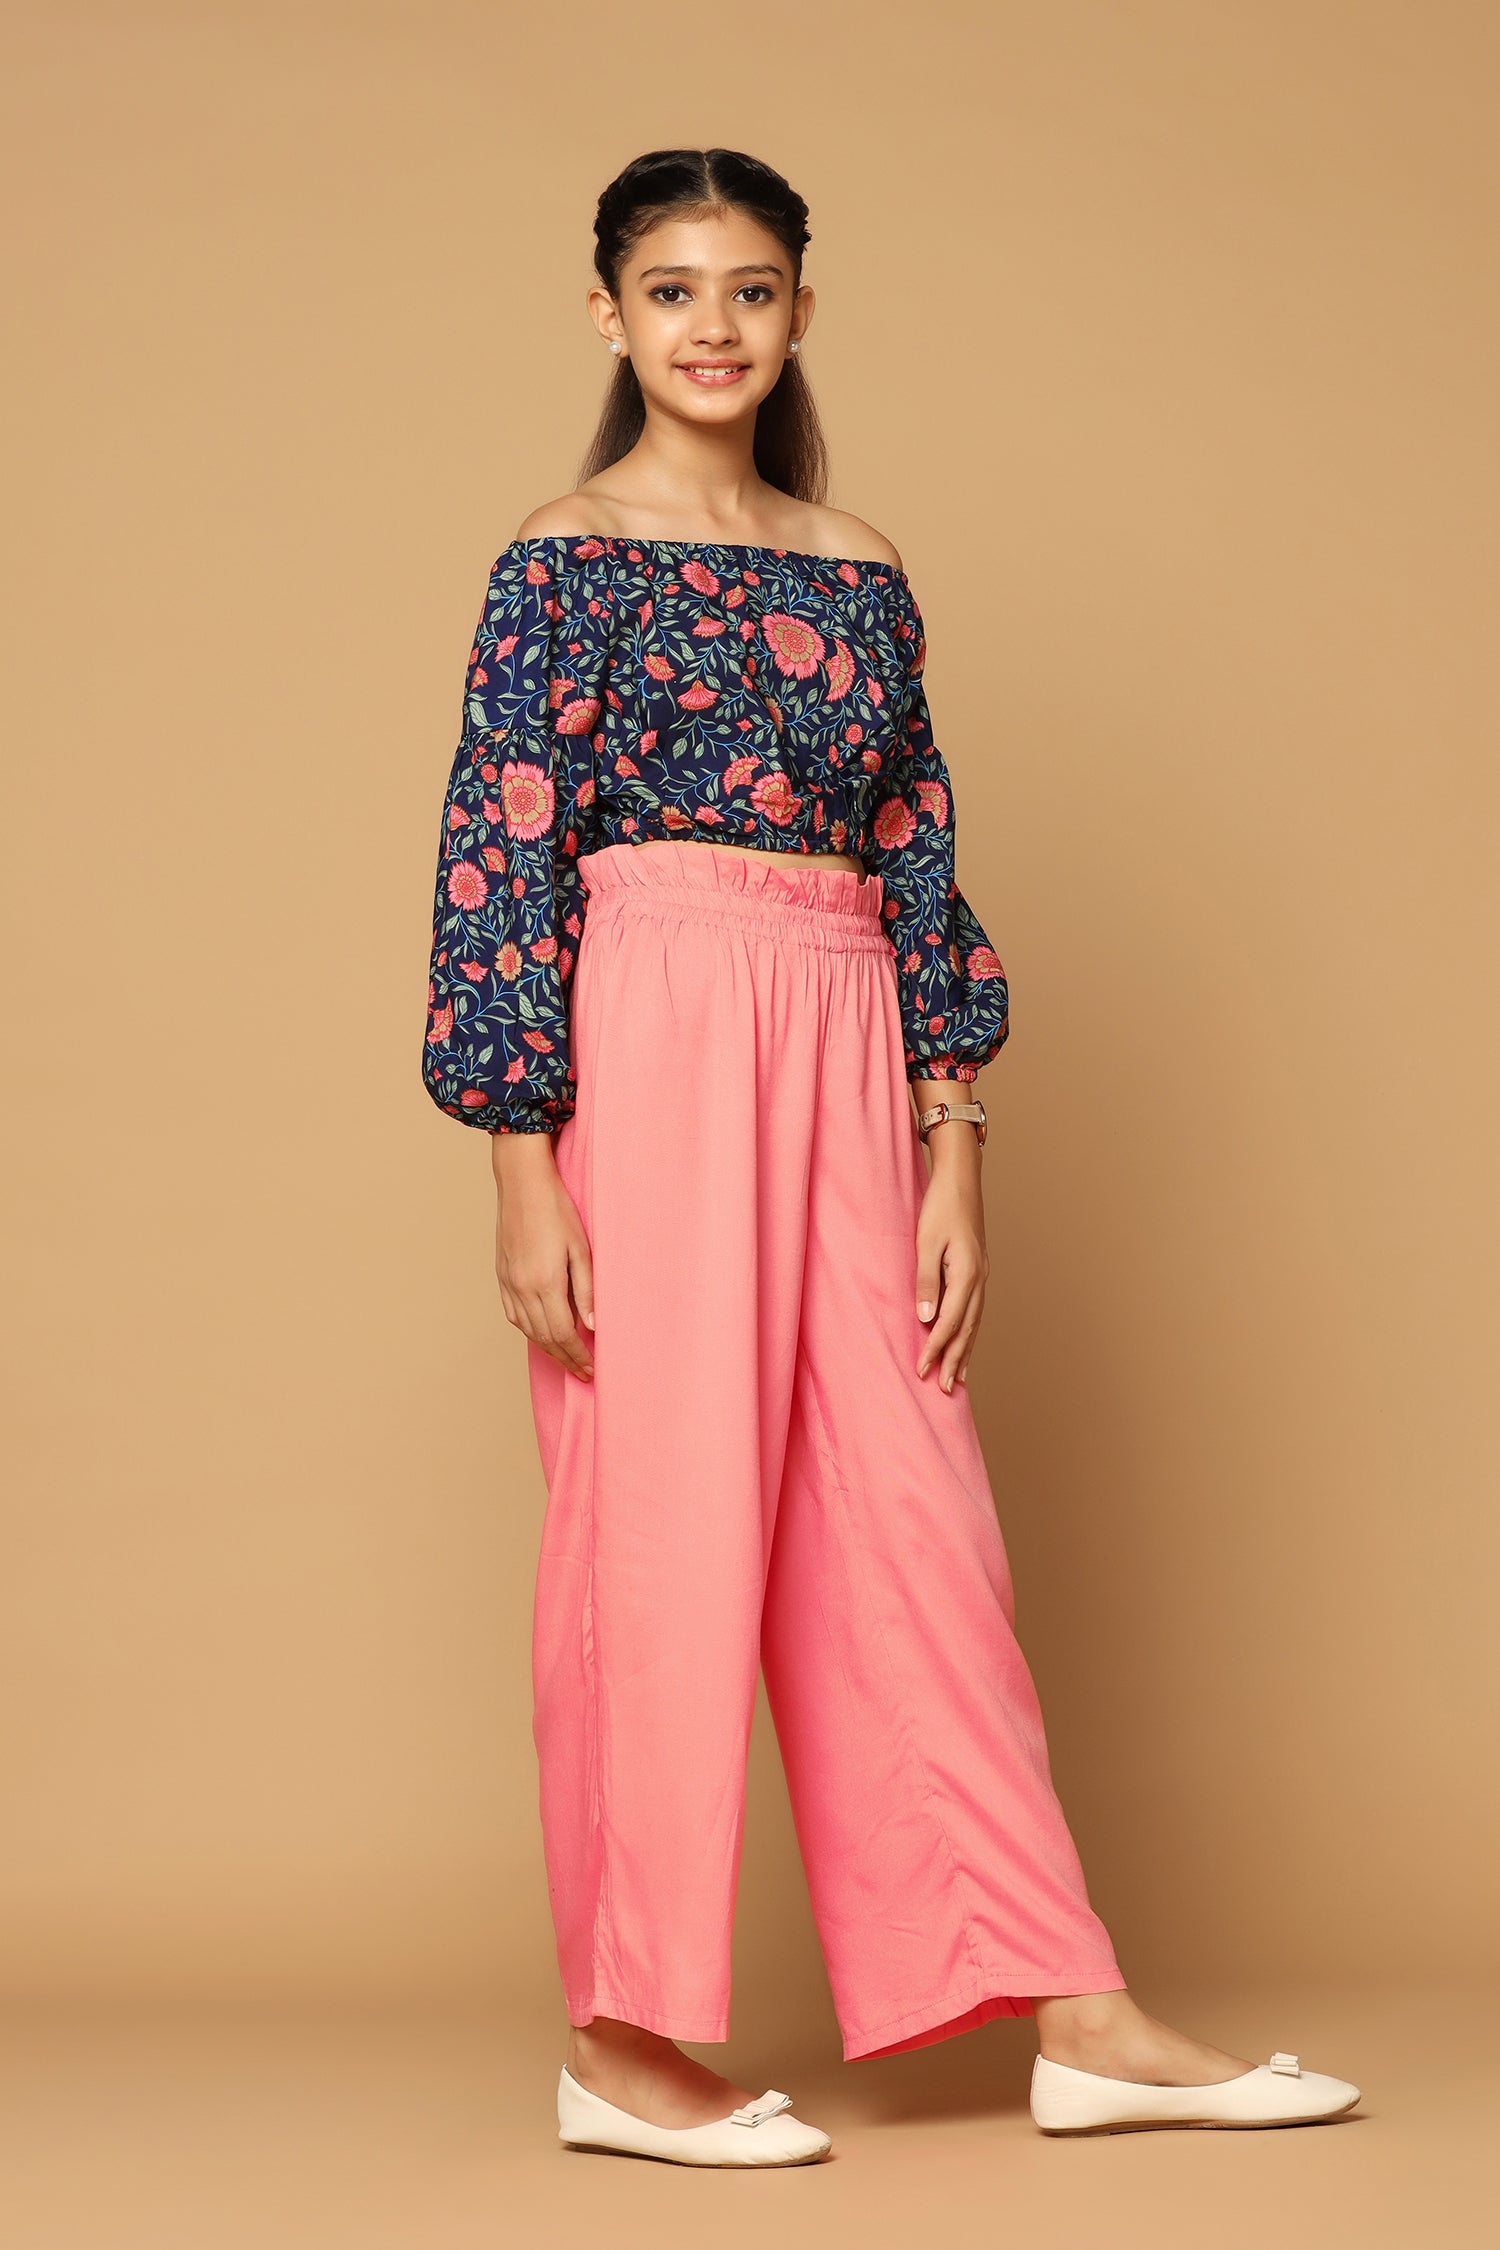 Red Crinkled Off Shoulder Top With Wide Leg Pants | ADFY-SNCRS-589 |  Cilory.com